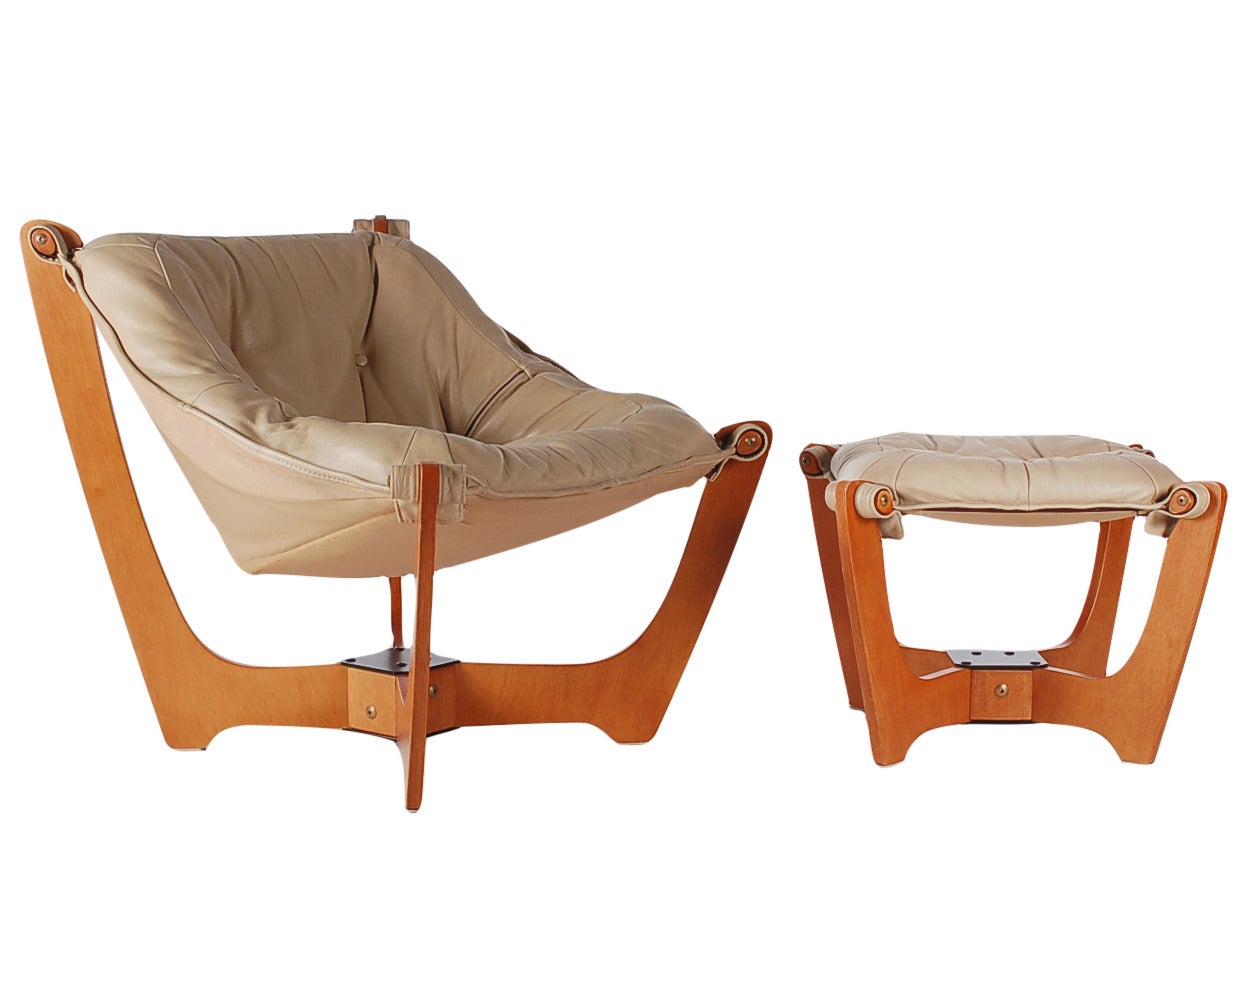 A vintage Luna chair designed by Odd Knutsen and produced in Norway. The chair features a teak frame and cream aniline leather sling. Ottoman measures: H 15.5, W 21, D 21.

In the style of: Ingmar Relling, Westnofa, Danish Modern.